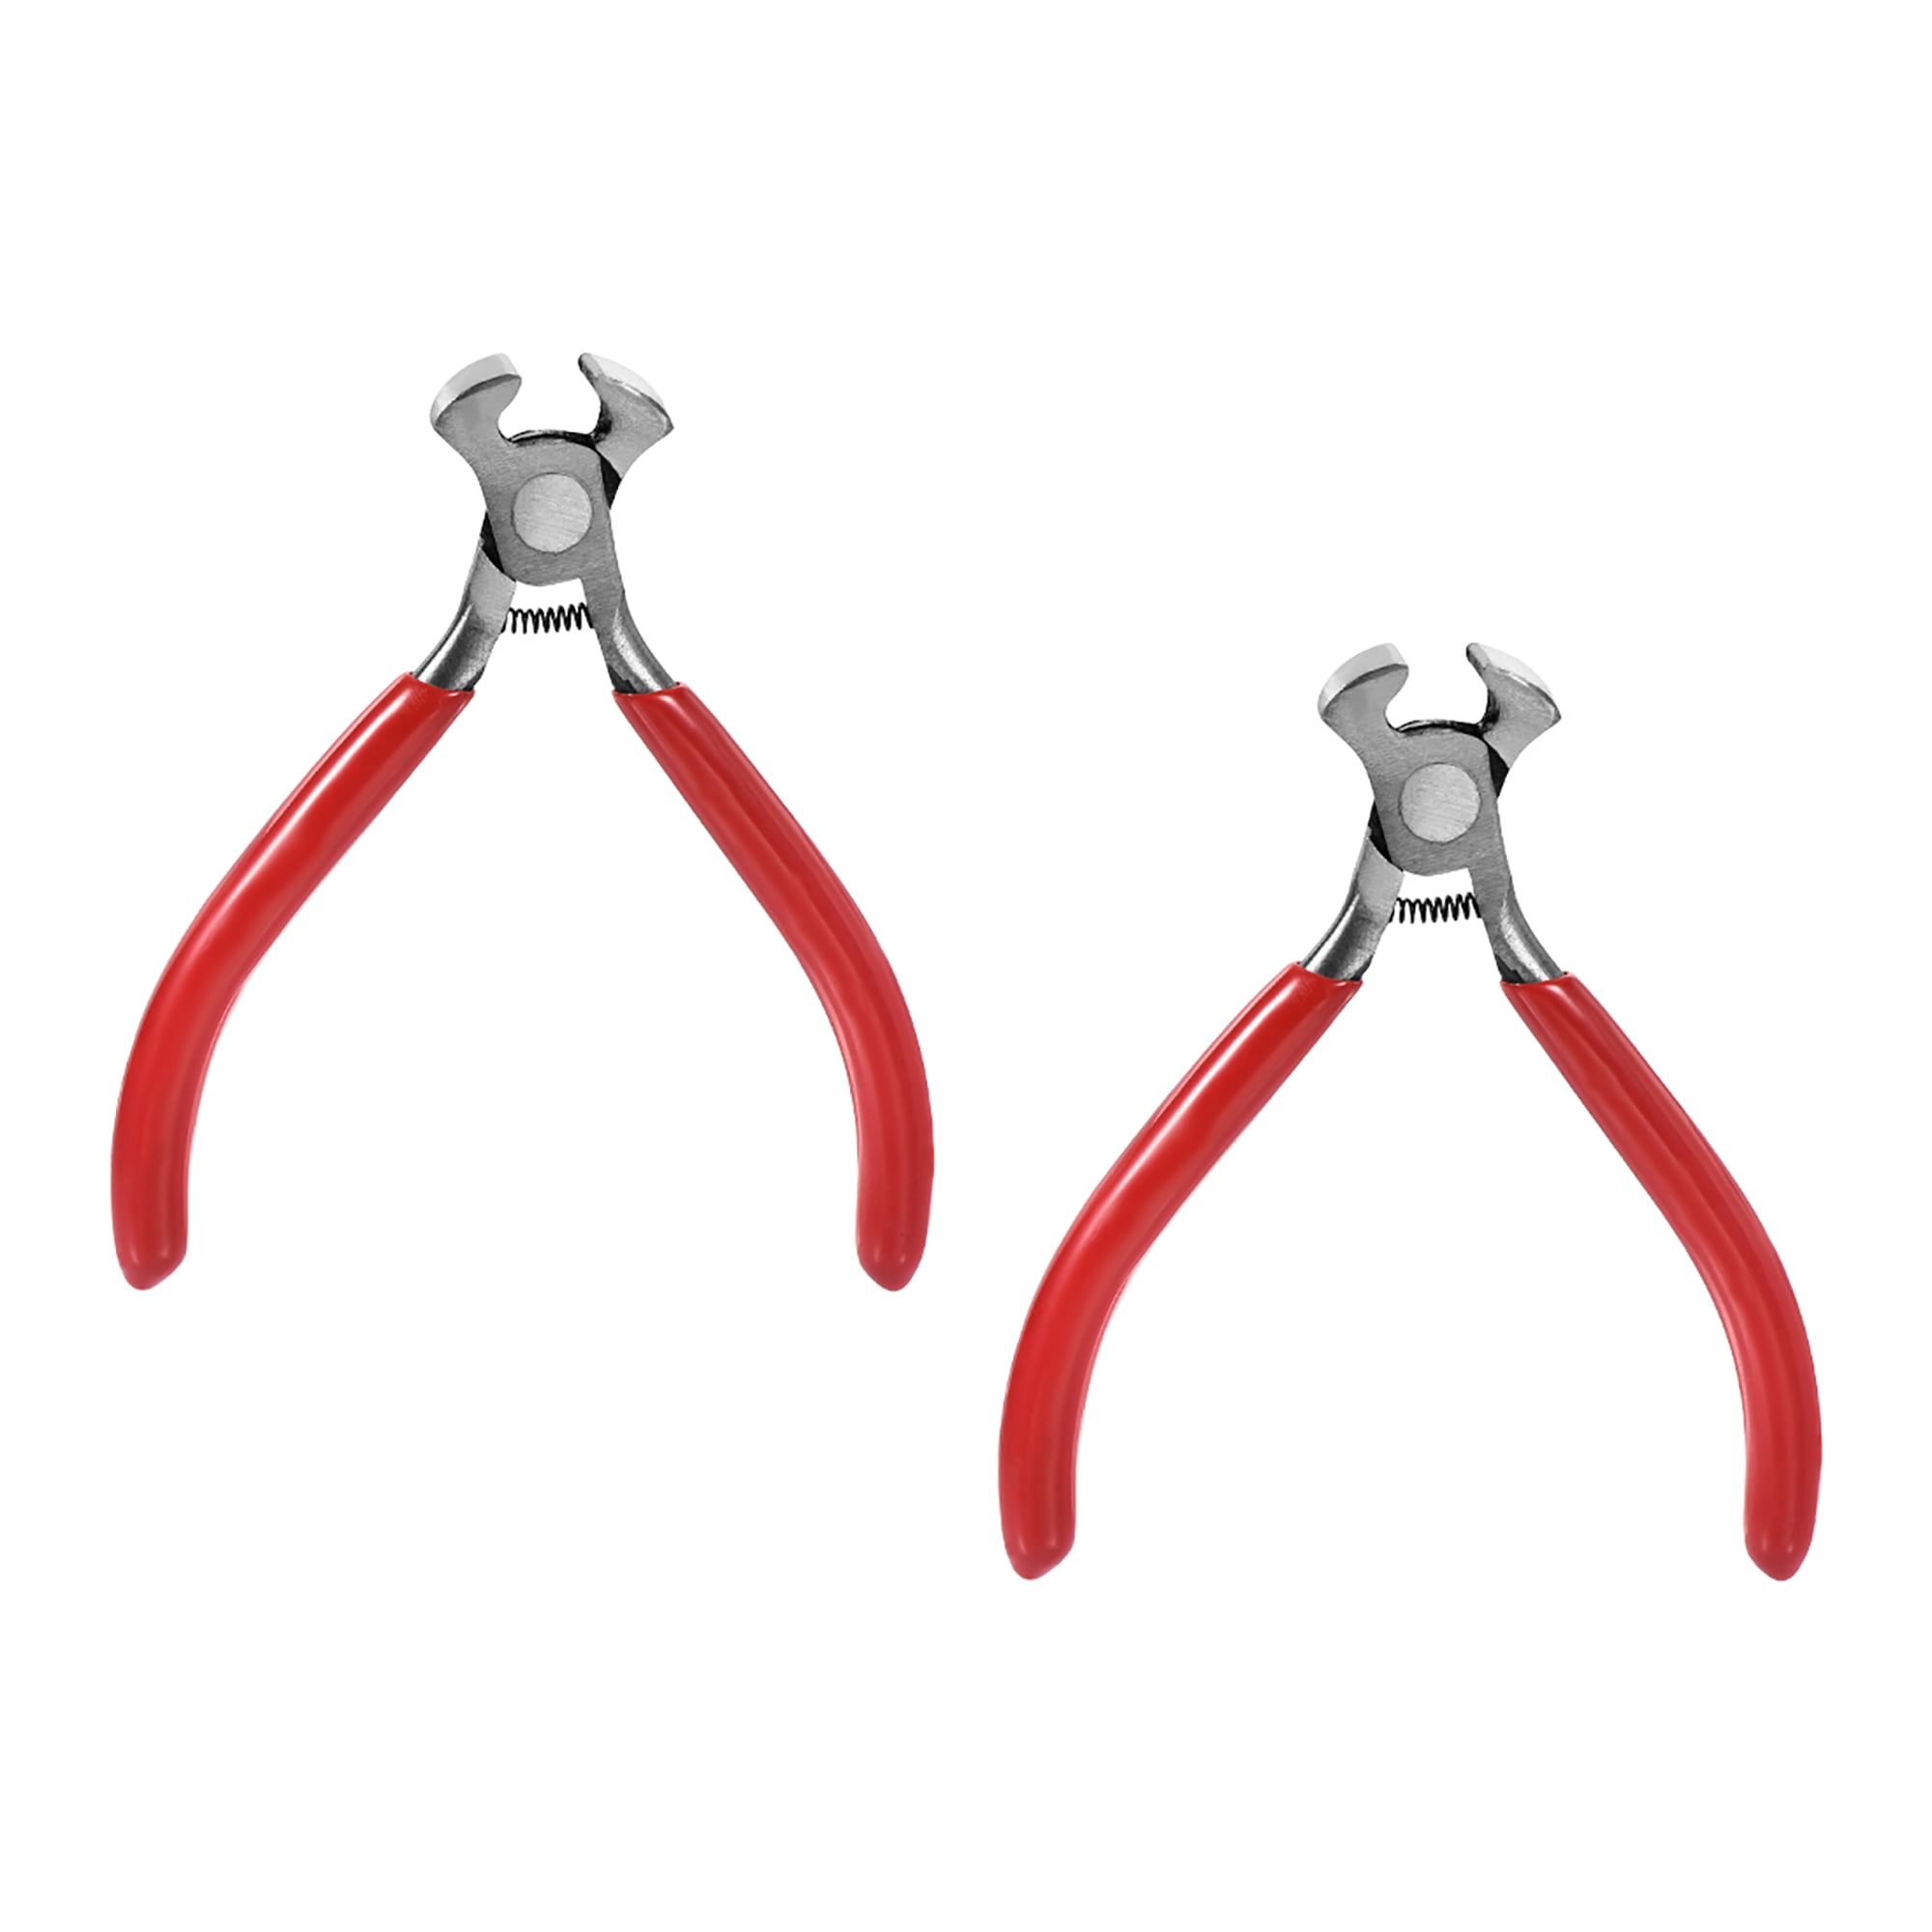 Flat End Cutter Fixer Pliers Snips Wire Cable Cutting Nippers Nip Cutter 